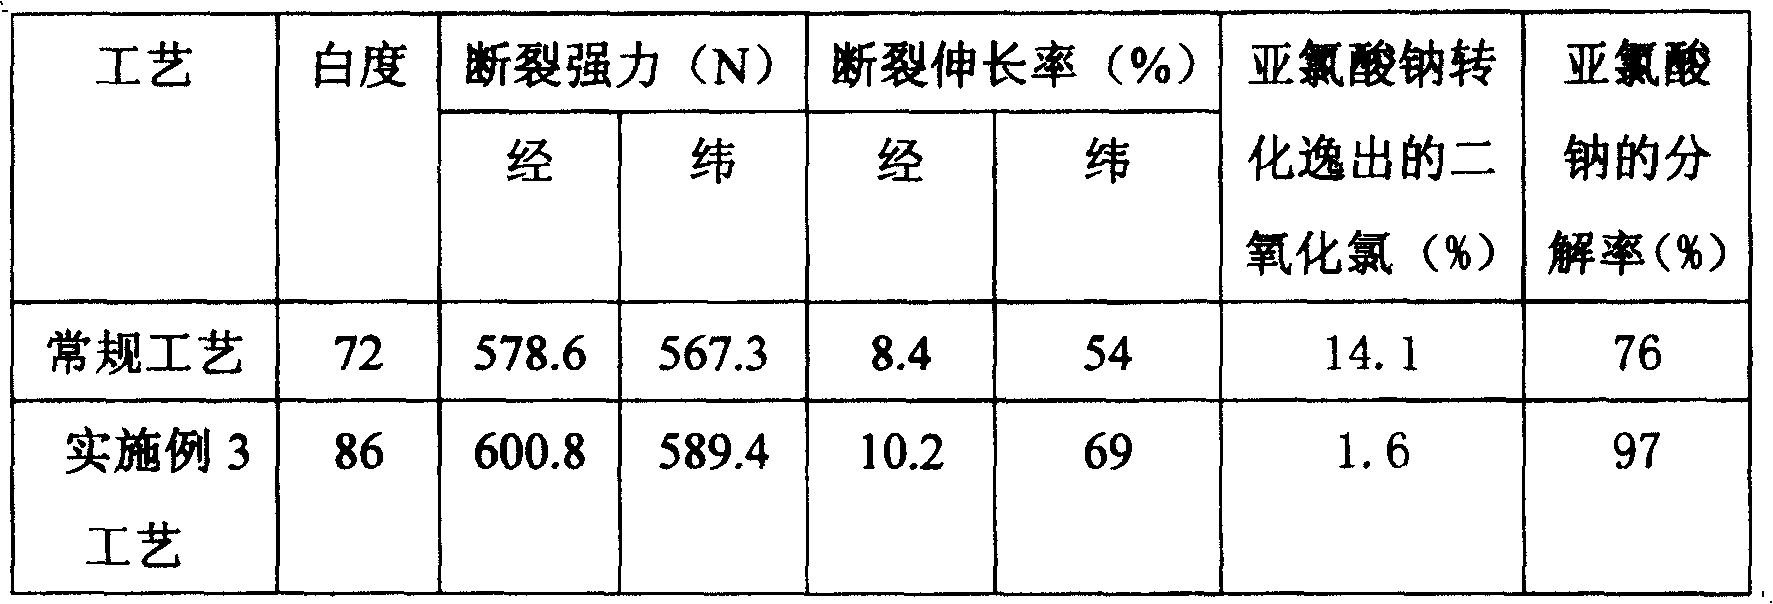 Stabilizer for use in sodium chlorite degumming and bleaching of flax and its preparation method and application